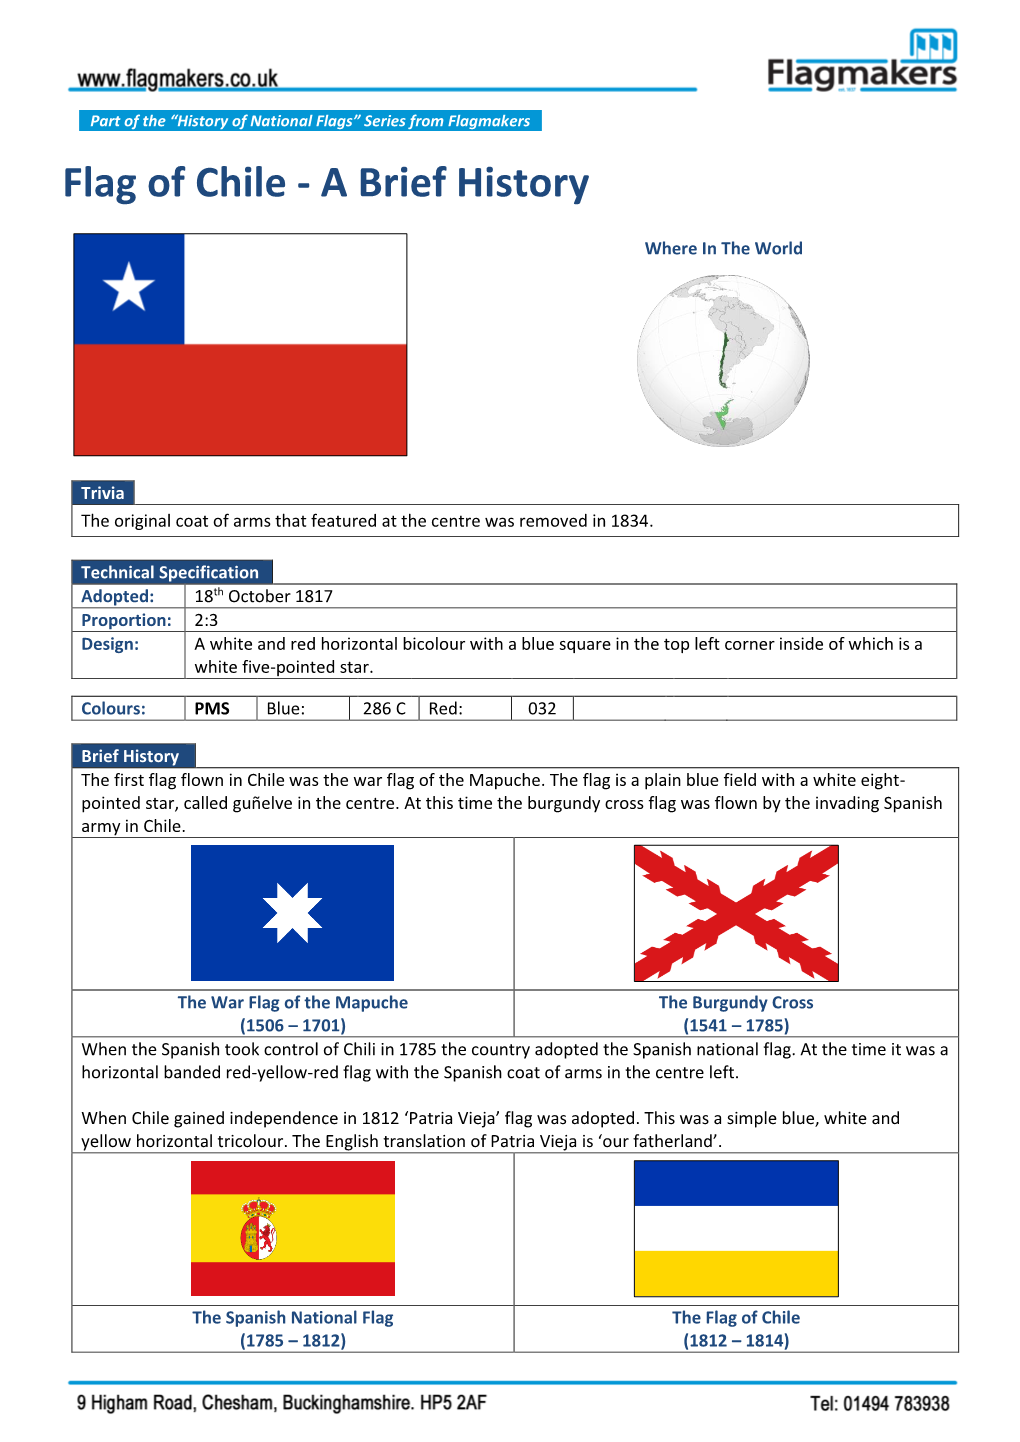 Flag of Chile - a Brief History